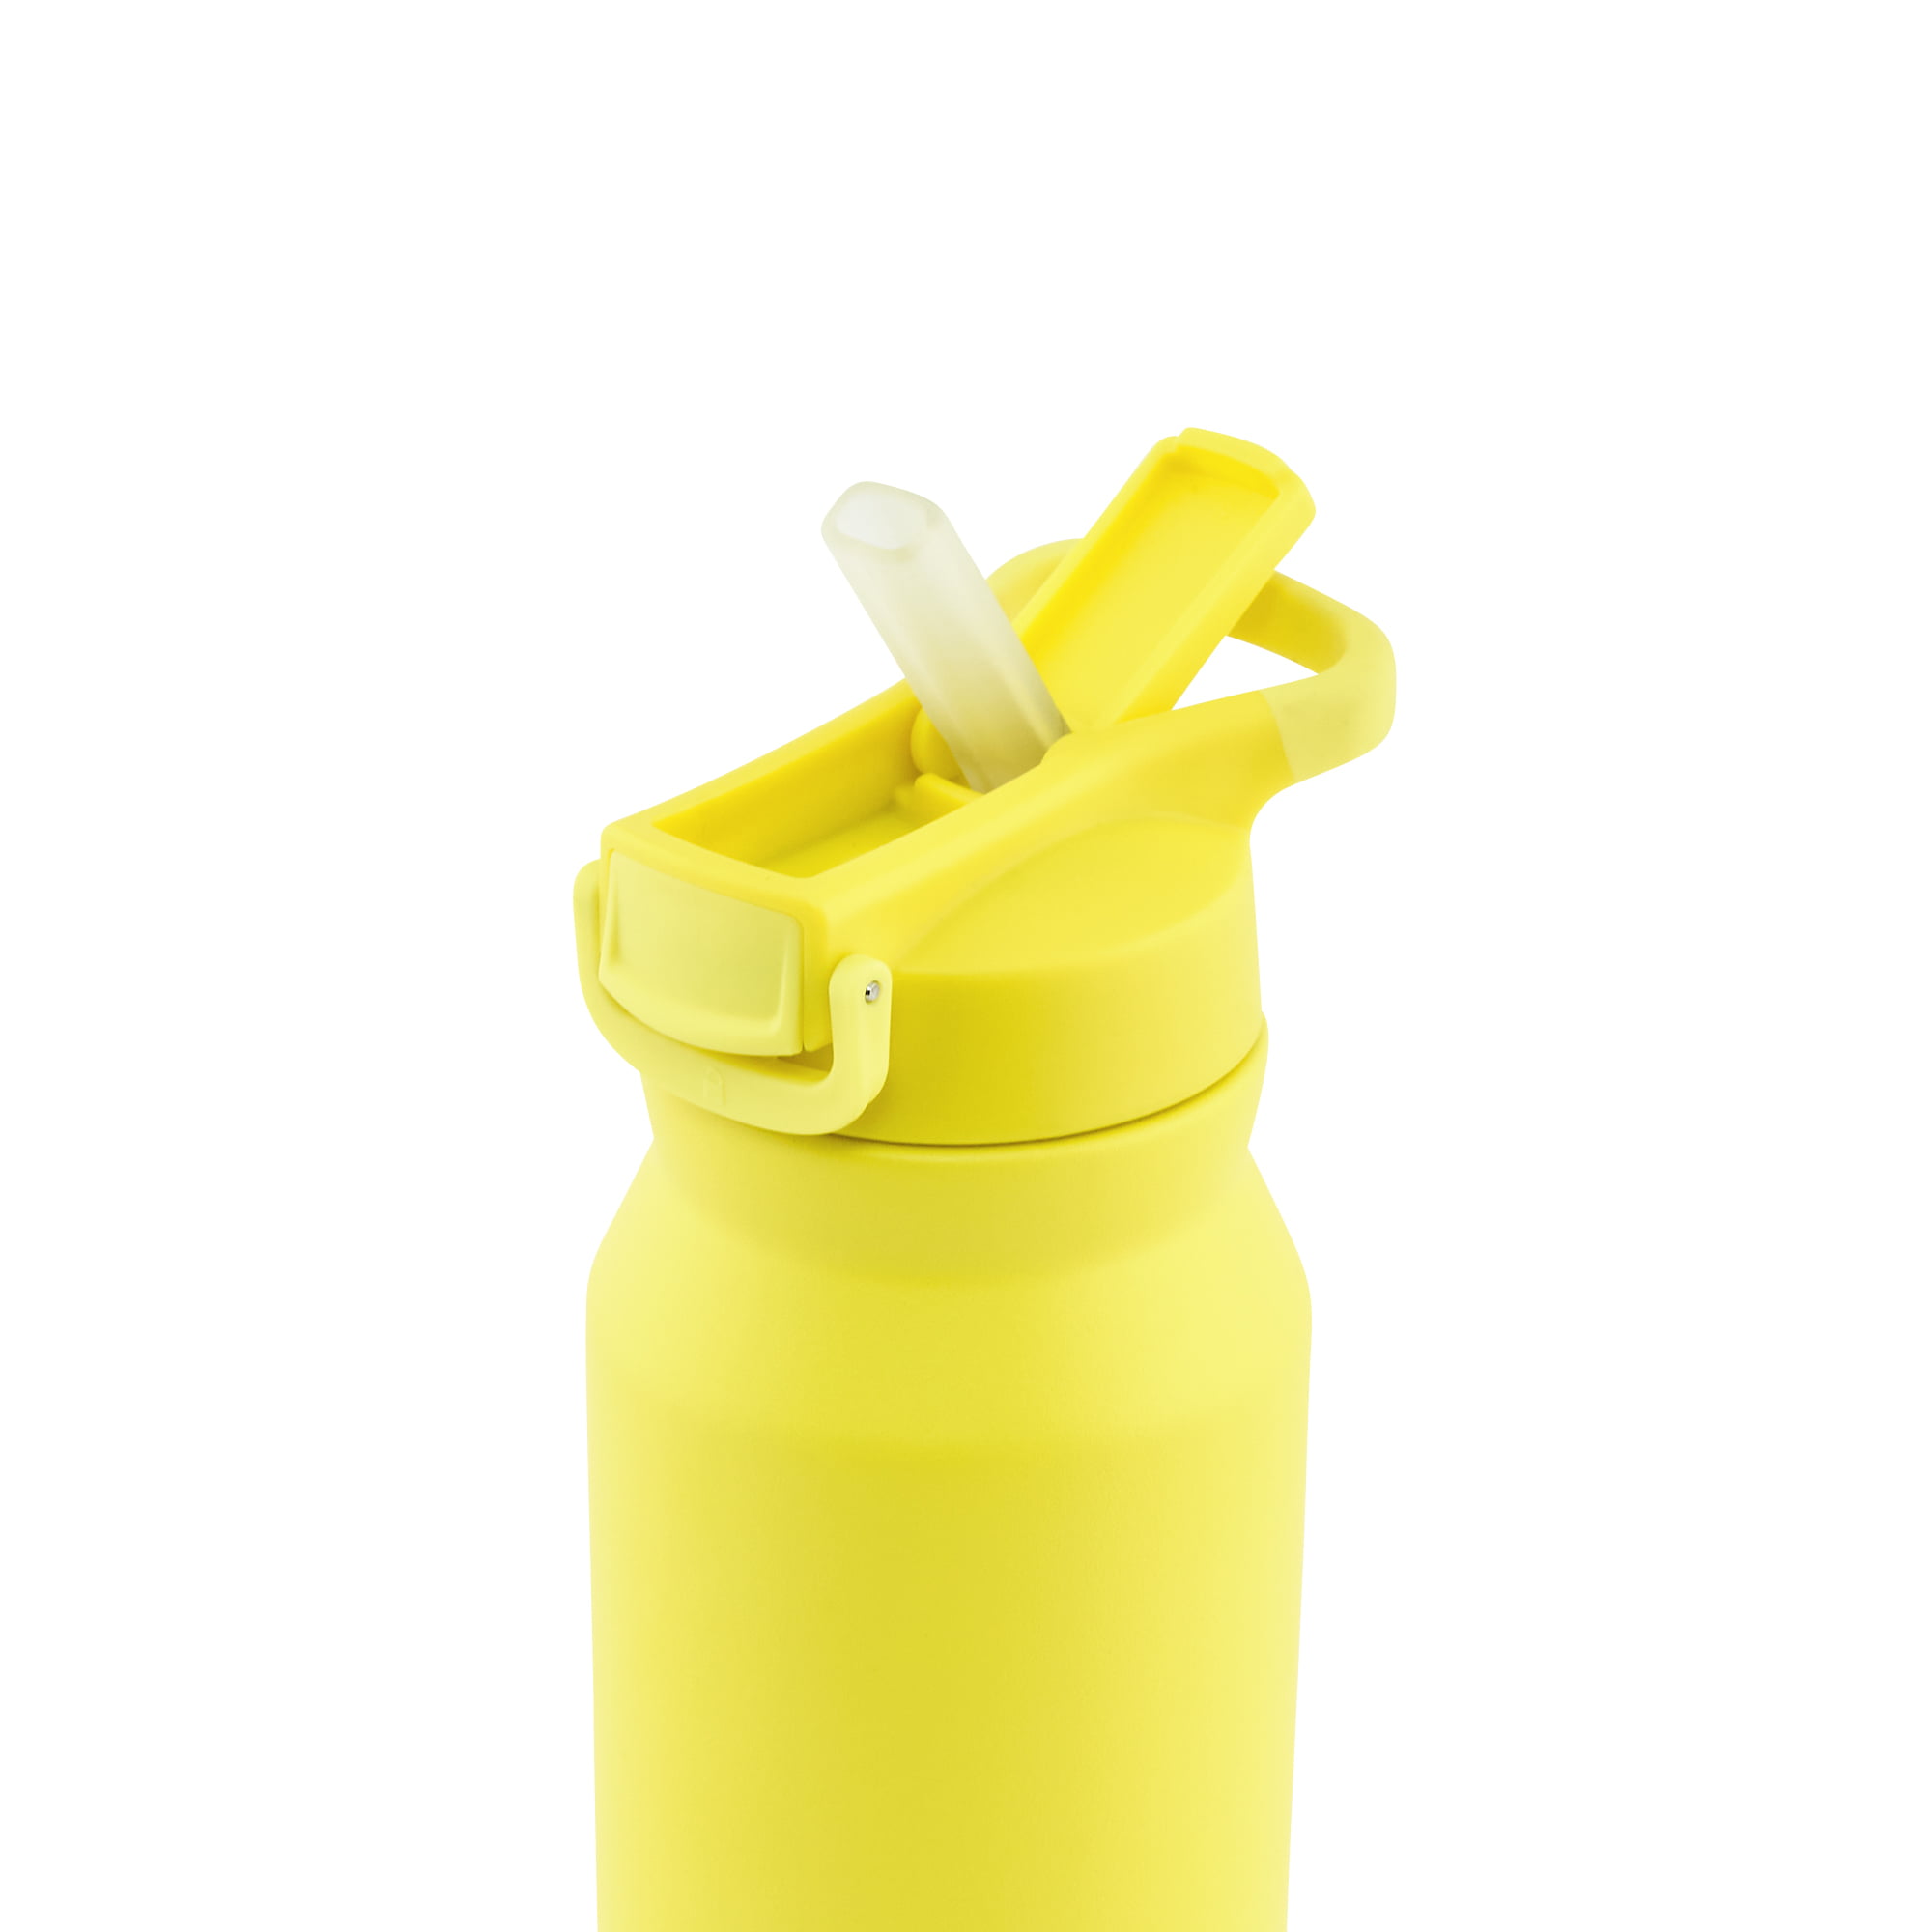 IVYRISE Stainless Steel Water Bottle, Vacuum Insulated Double Wall, Keep  Hot to 12, Cold to 24 Hours, 17oz, Yellow